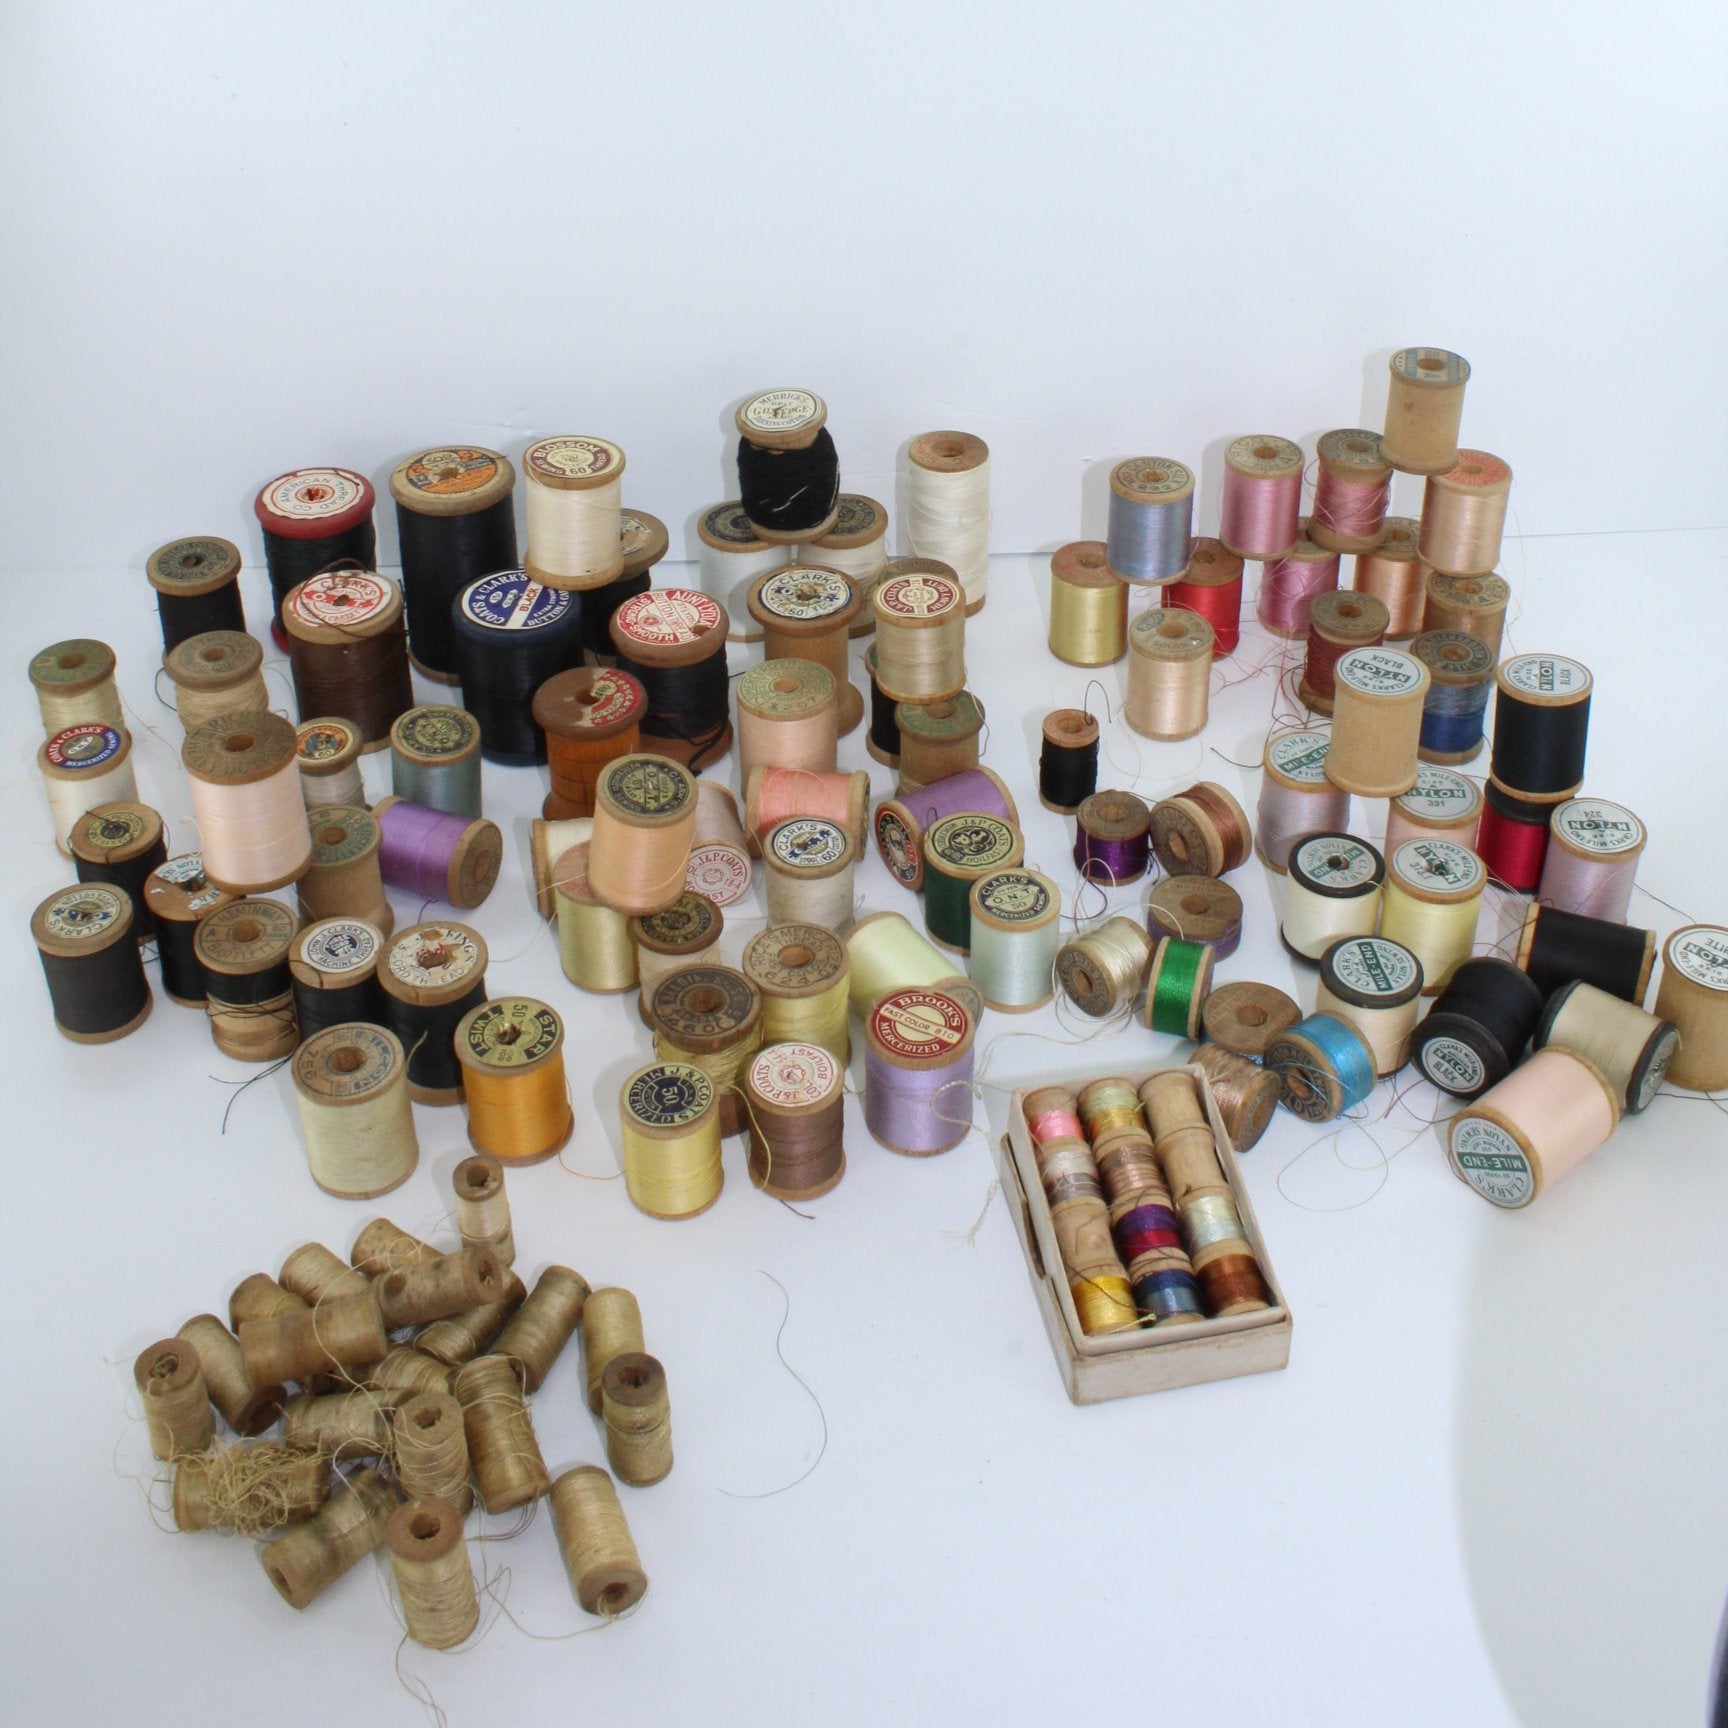 Lot of 22 Vintage Sewing Thread Spools Wood Wooden for Crafting Crafts